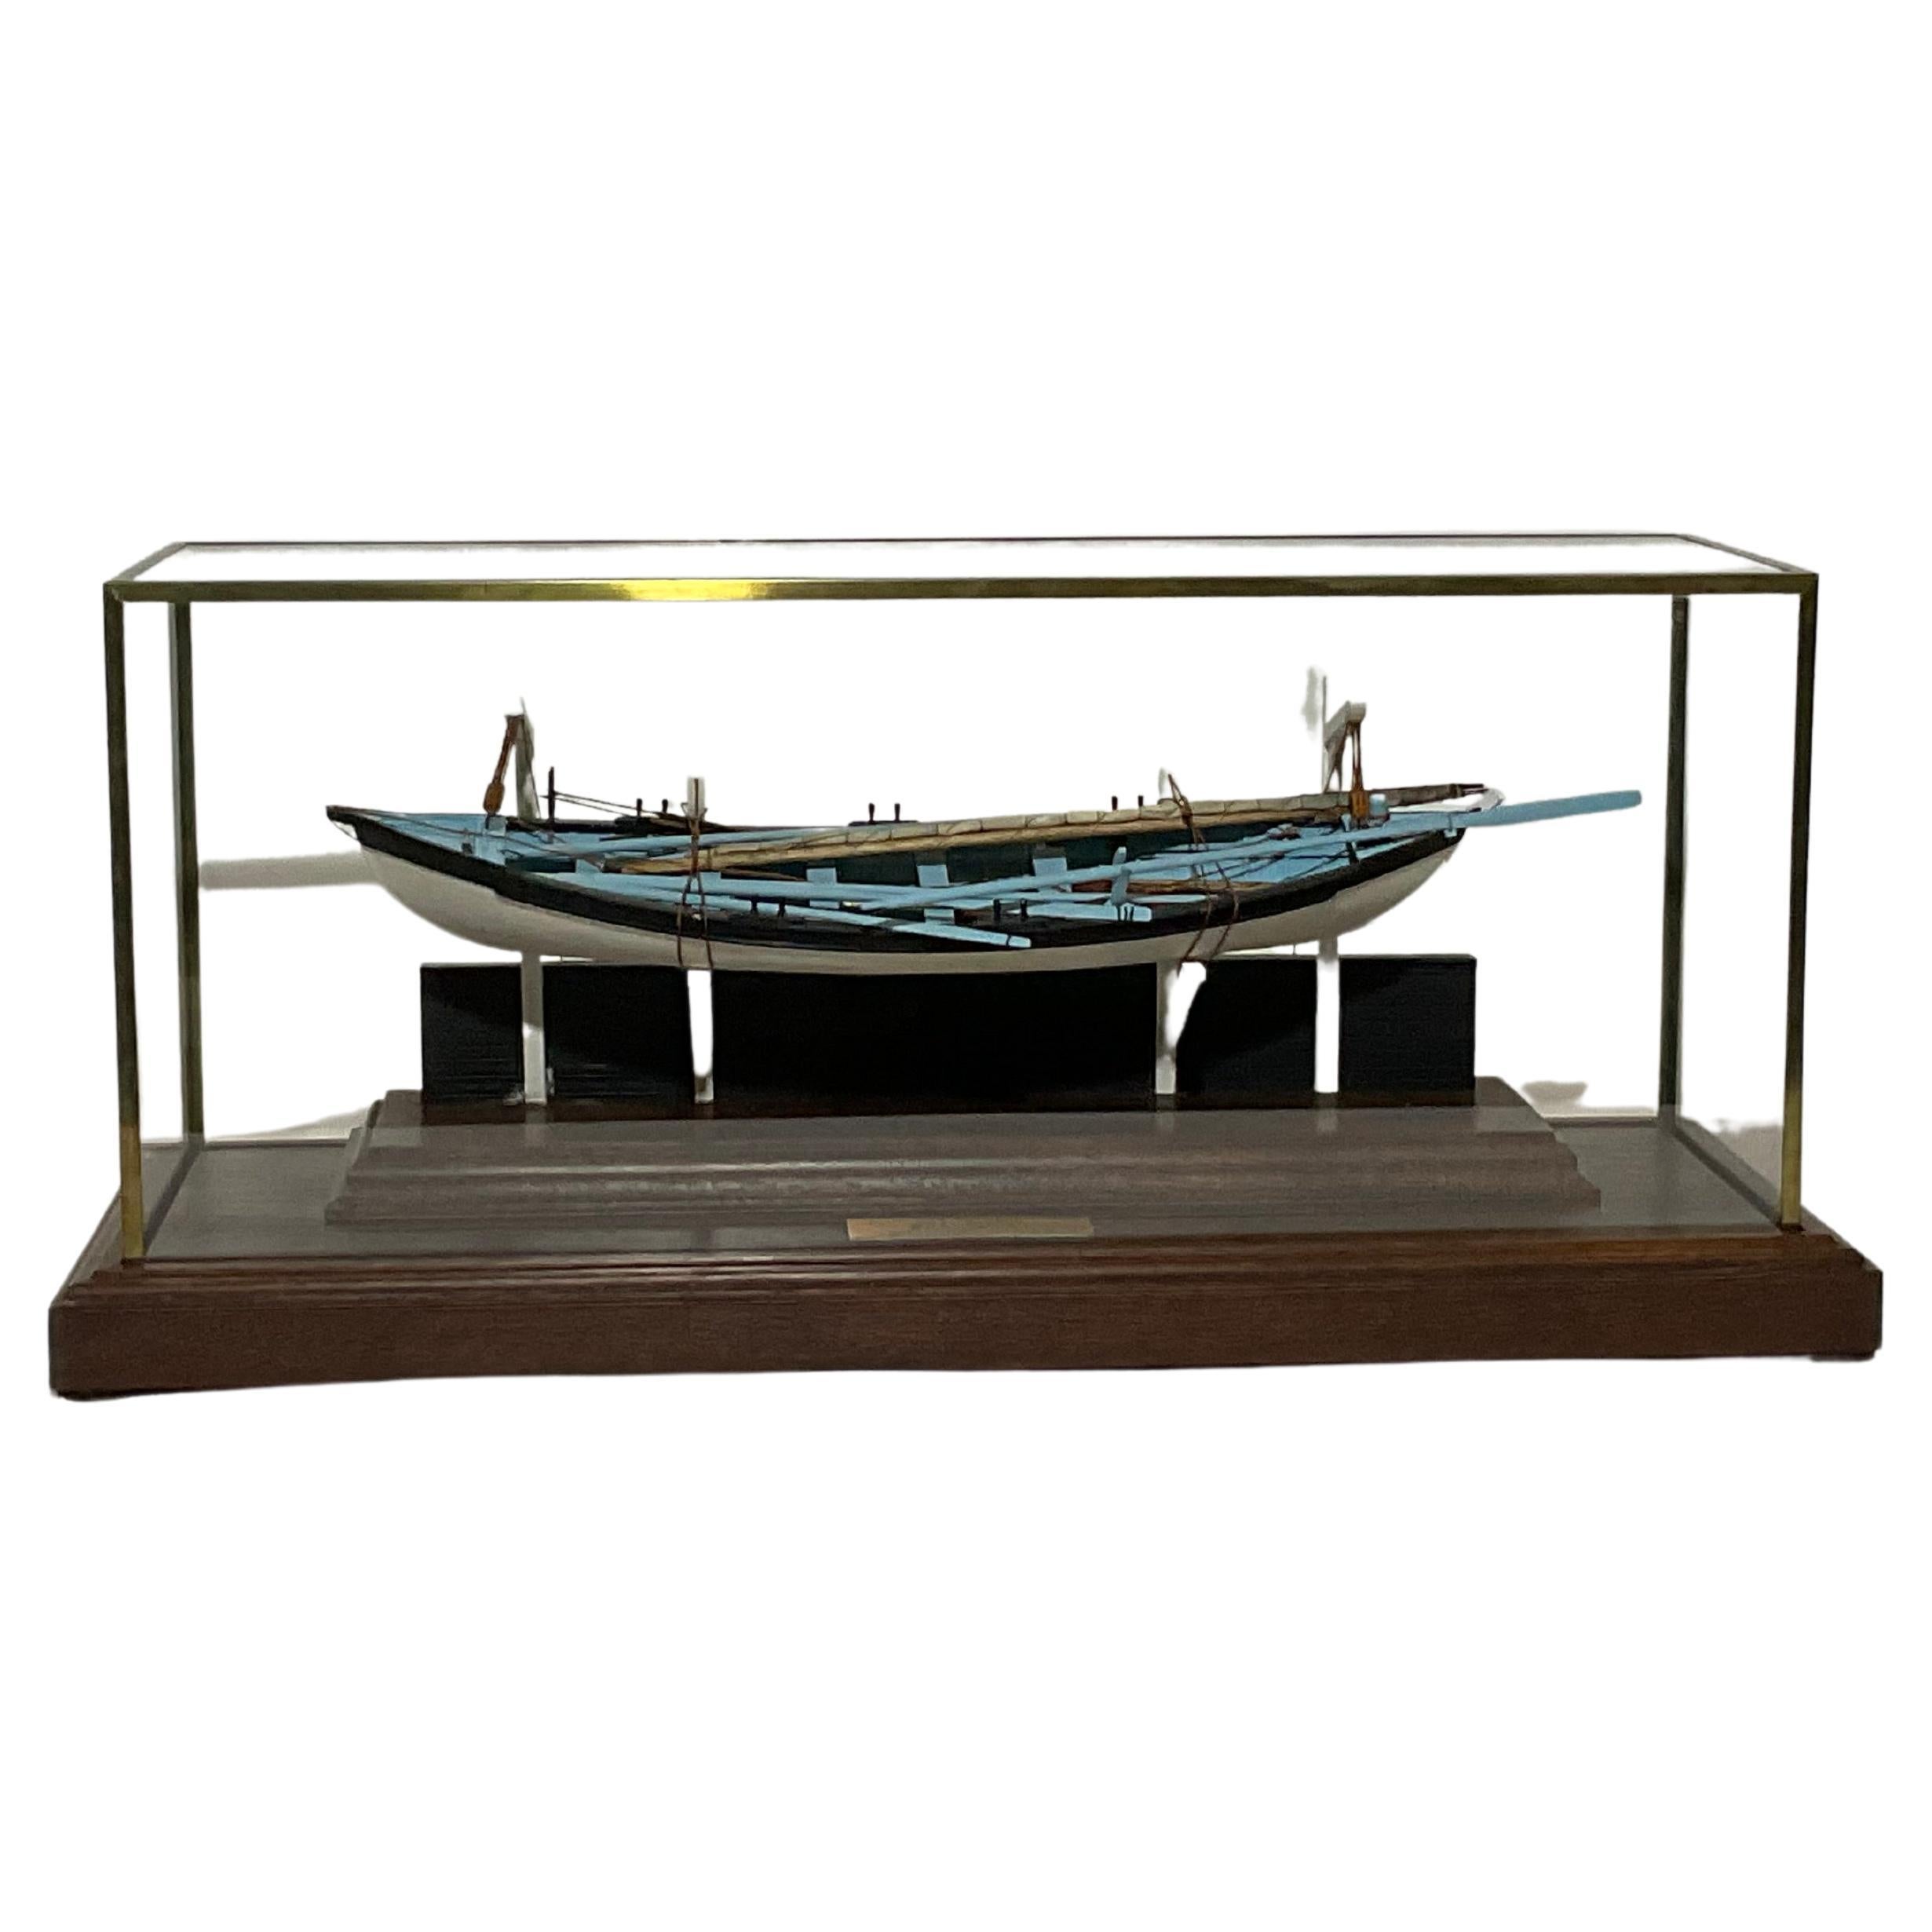 Whaleboat Model by William Hitchcock For Sale